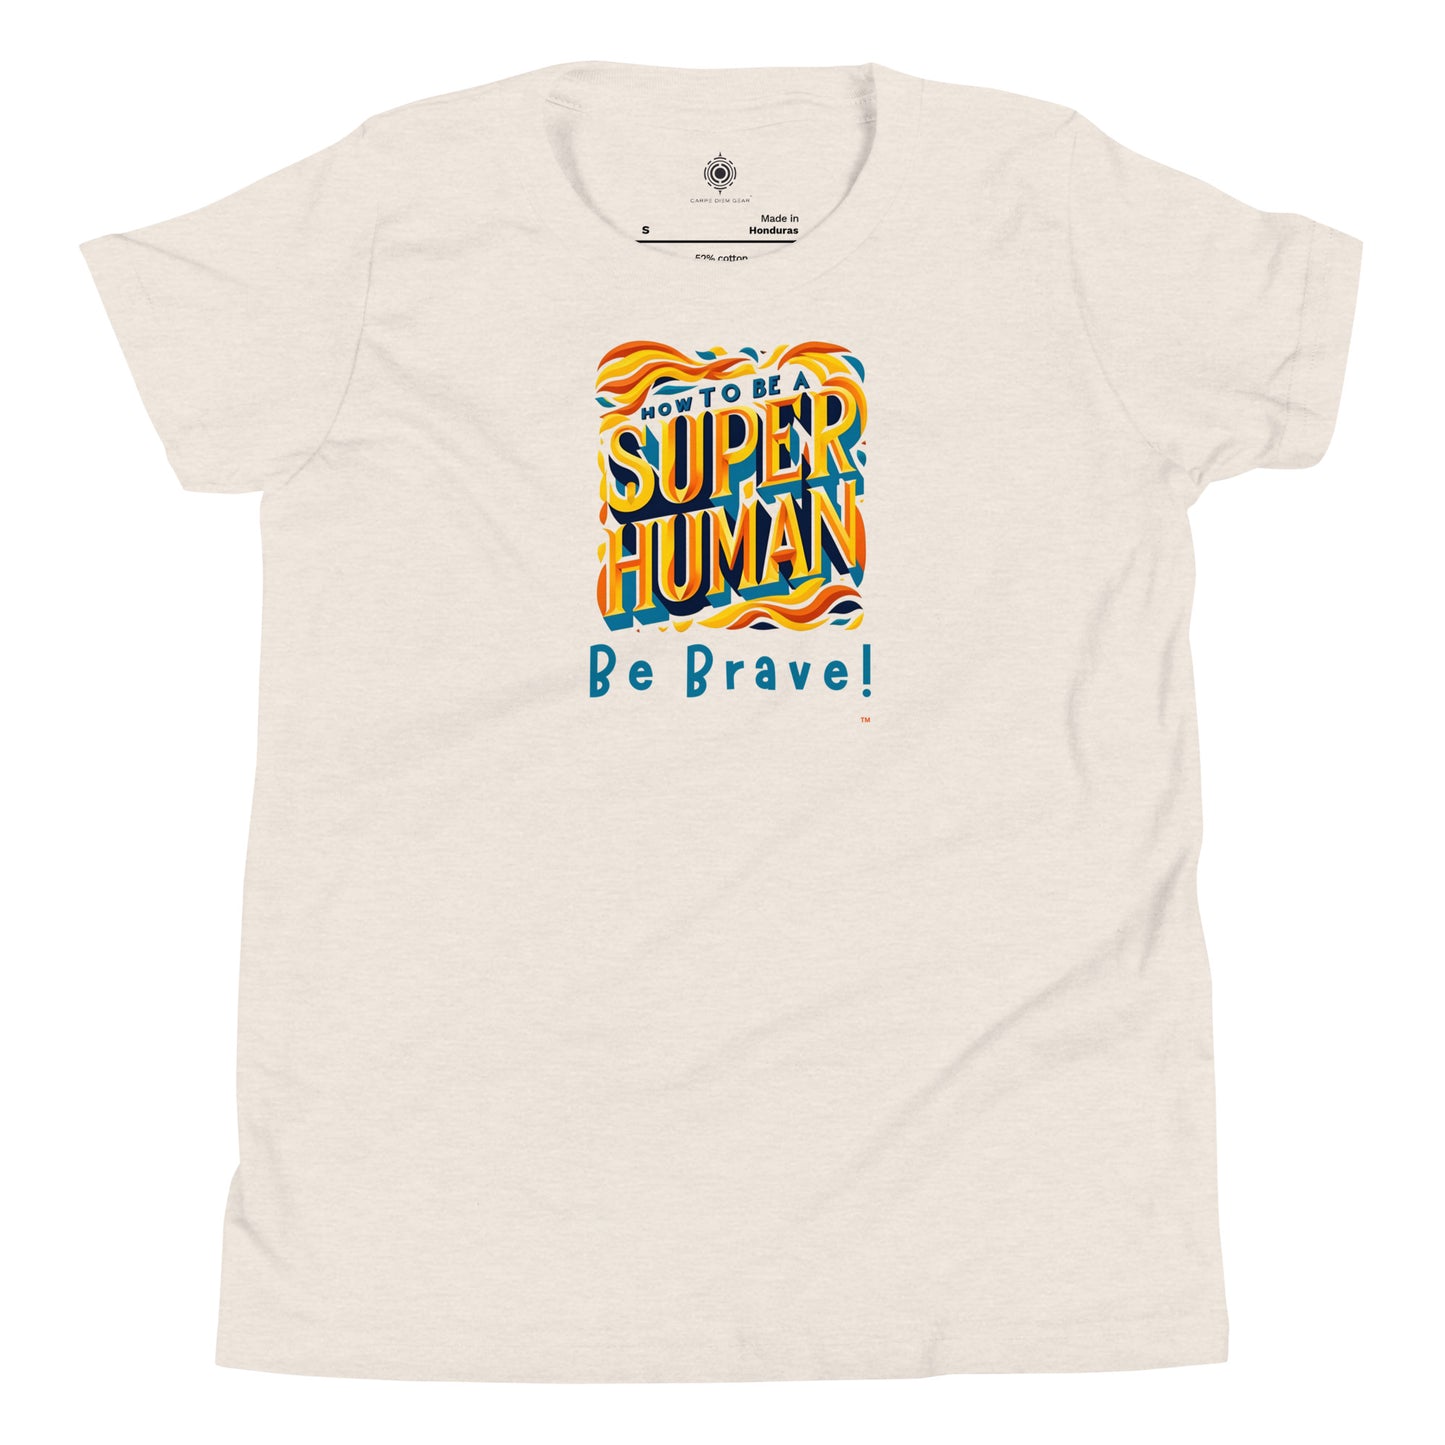 Carpe Diem Gear | "How to be a SUPER Human" | Be Brave! | Youth 100% Ring-Spun Cotton Short Sleeve T-Shirt